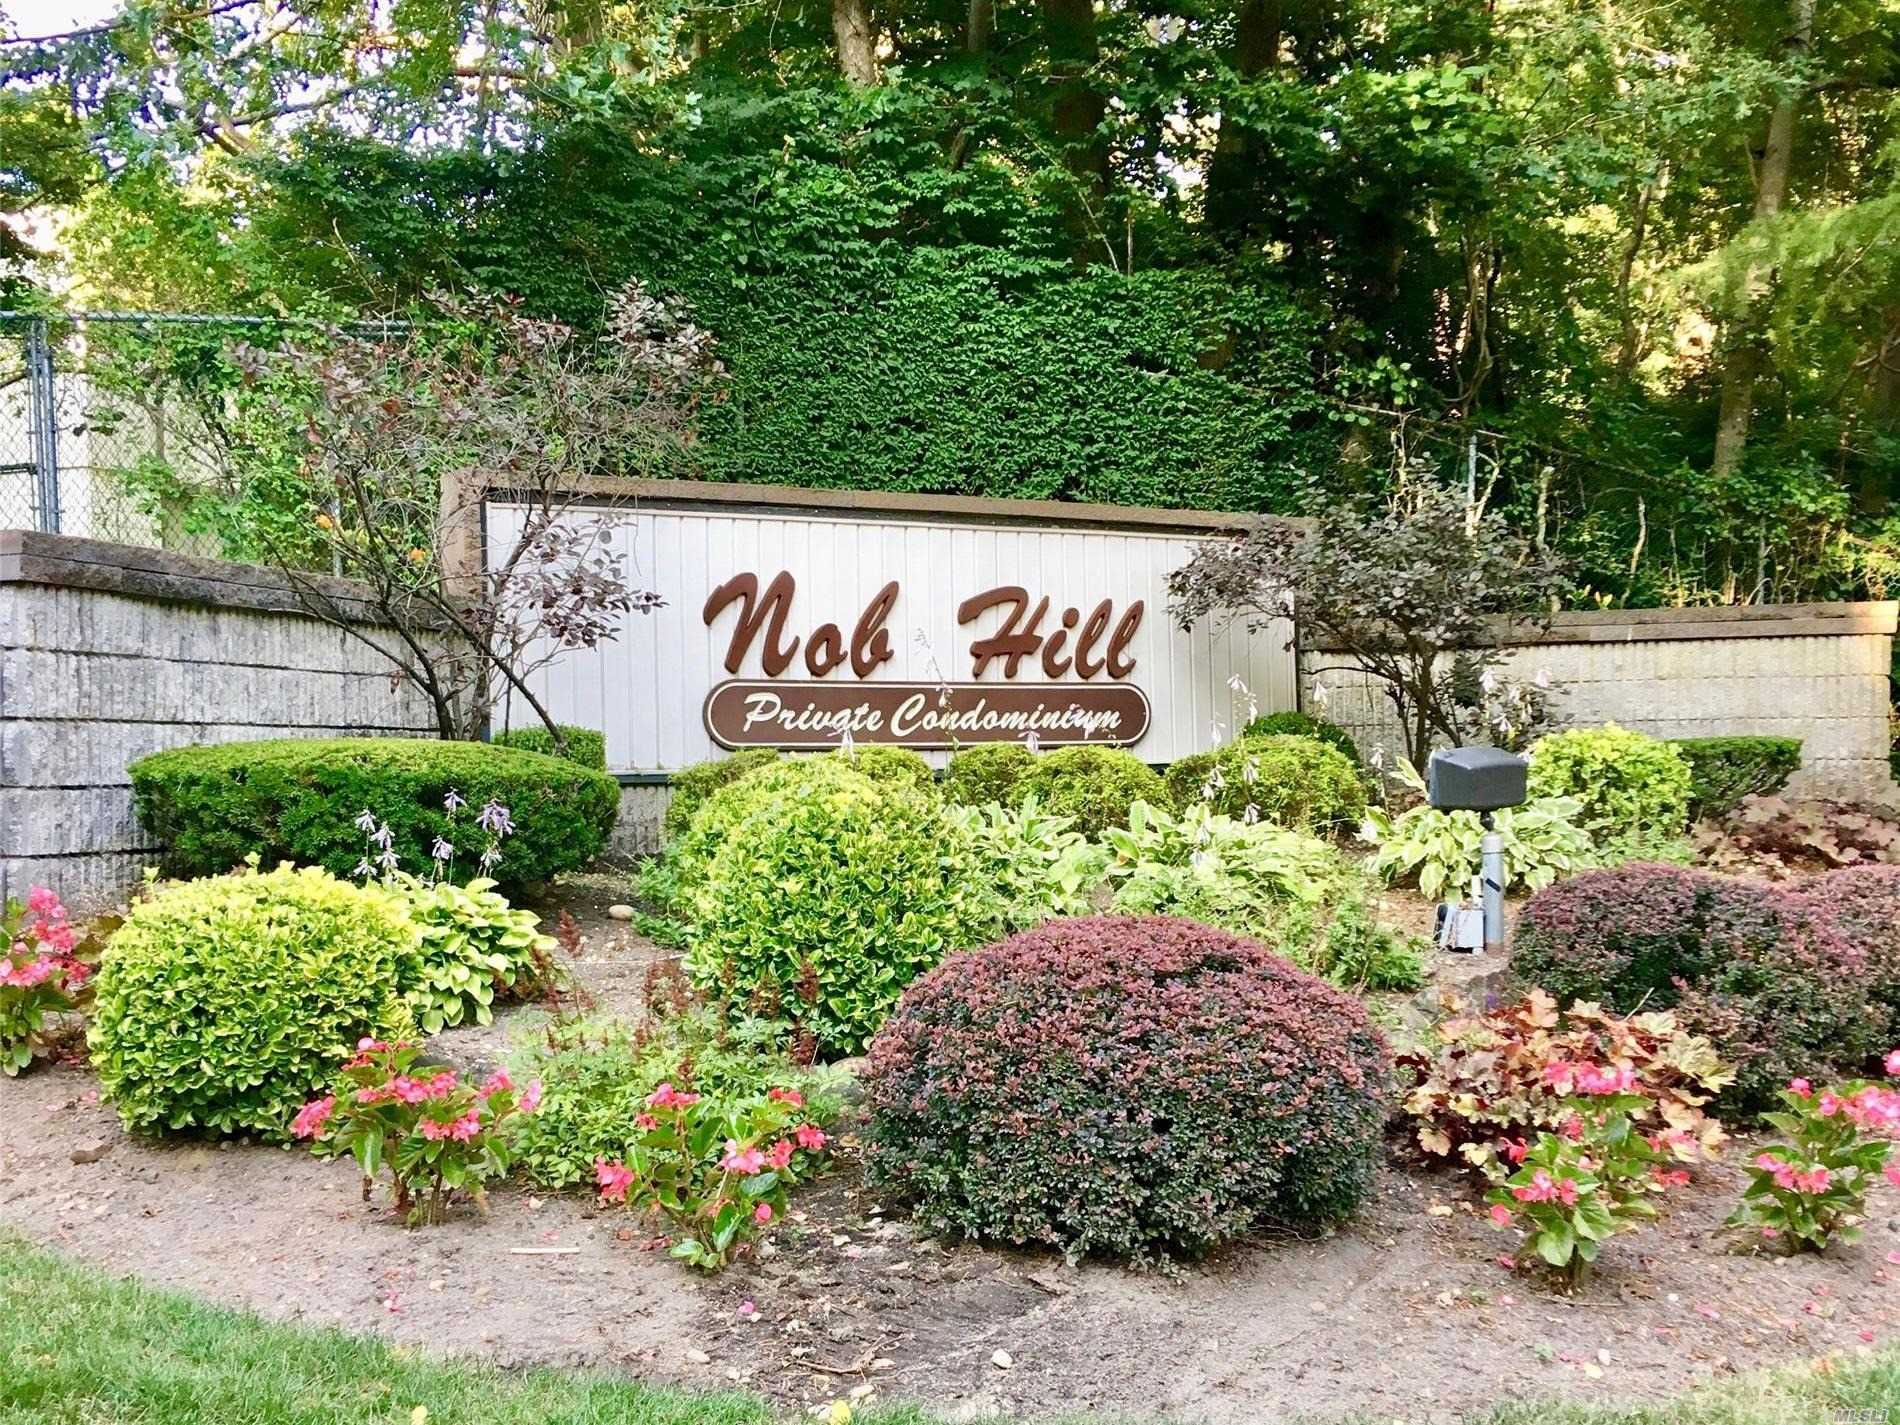 Check out this cozy bright condo located in Nob Hill North! Move-in ready! Amenities include resort-like pool, tennis, gym, and a club house. Centrally located to shopping, LIRR, and MacArthur Airport!